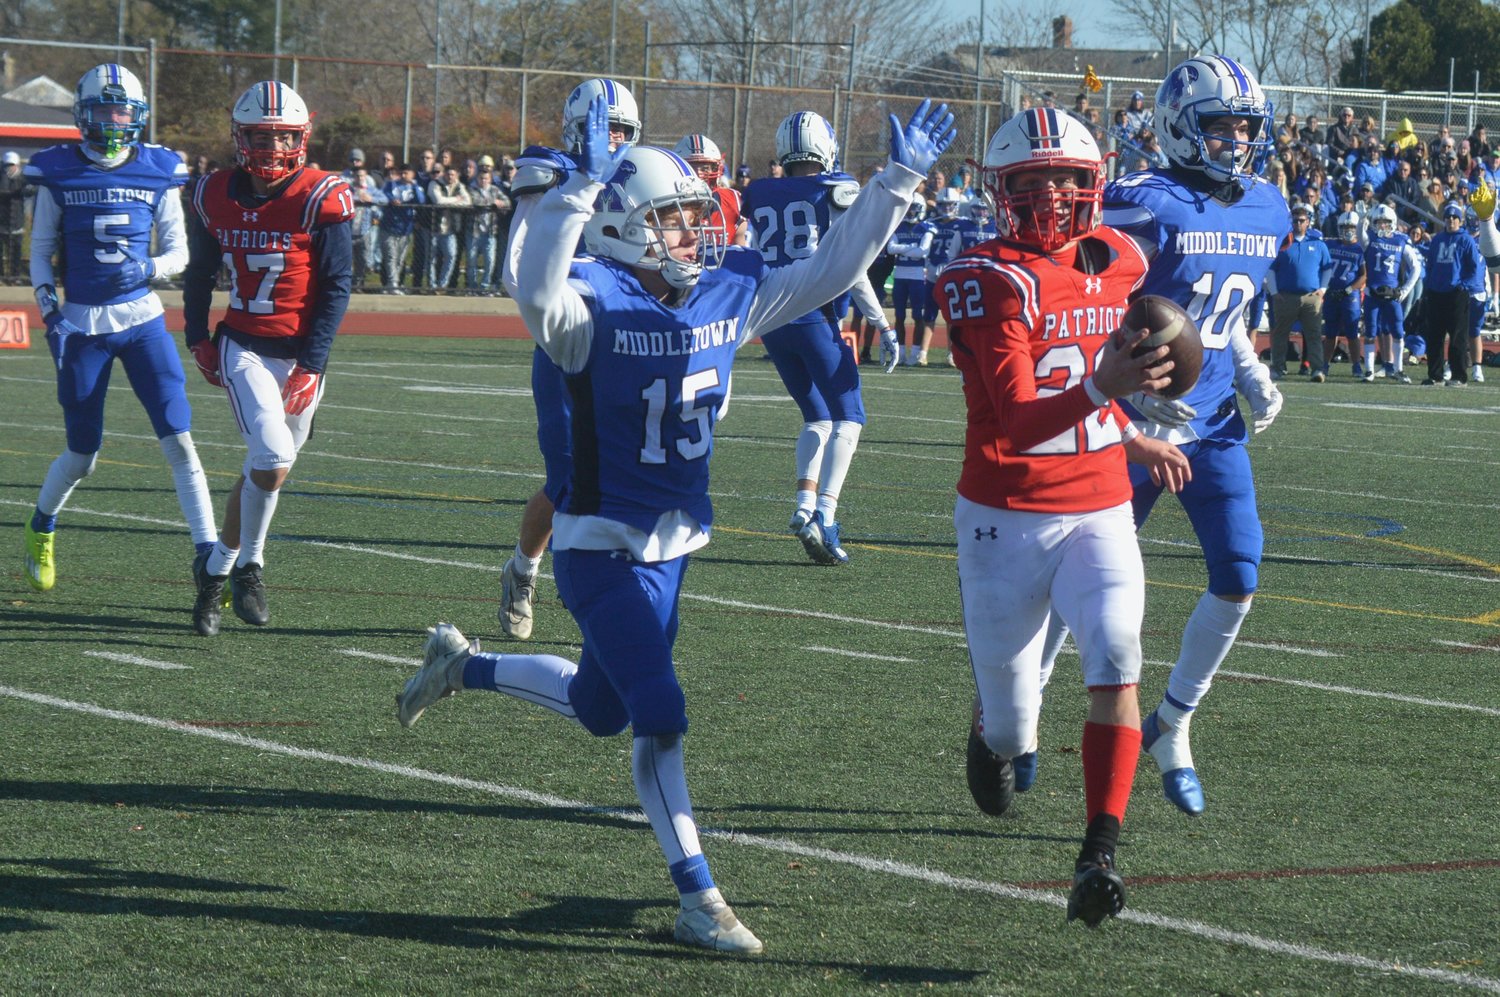 The Patriots’ Dylan Brandariz runs into the end zone for what appeared to be a touchdown in the fourth quarter, but a holding call against Portsmouth negated the play. Portsmouth would go on to score a TD anyway.